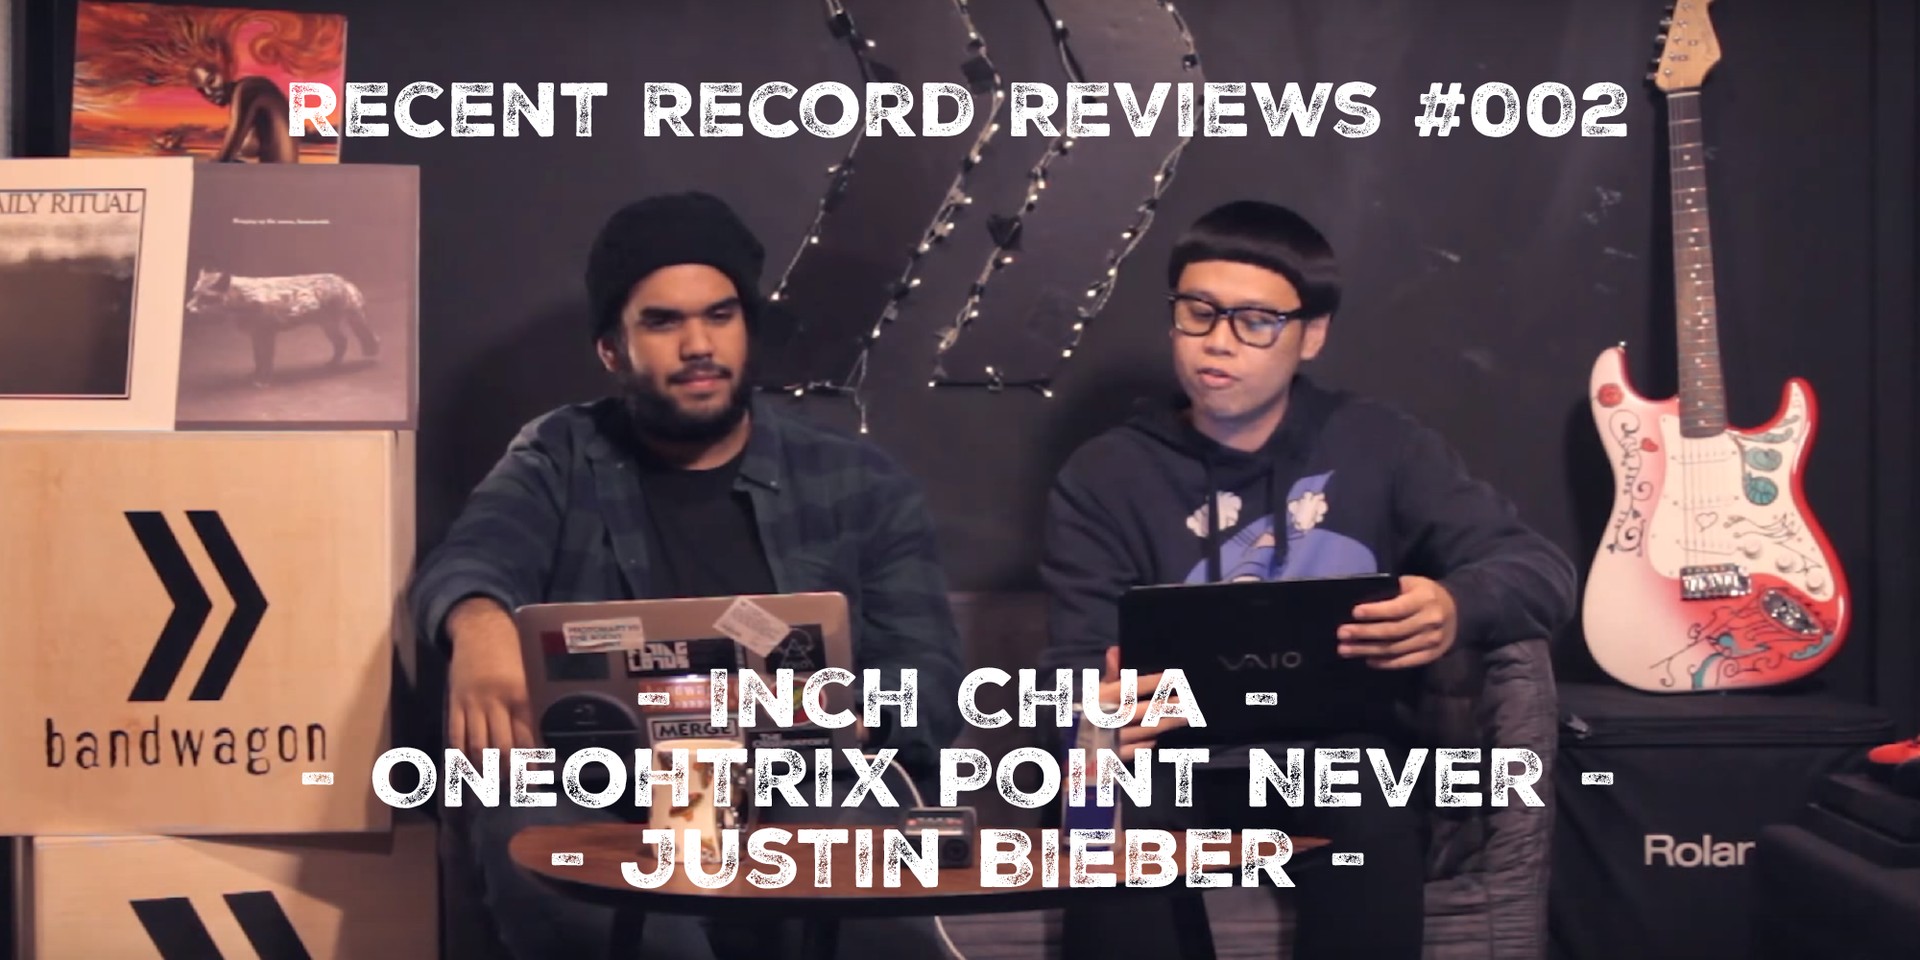 WATCH: Bandwagon Recent Record Reviews #002 - Inch Chua, Oneohtrix Point Never, Justin Bieber